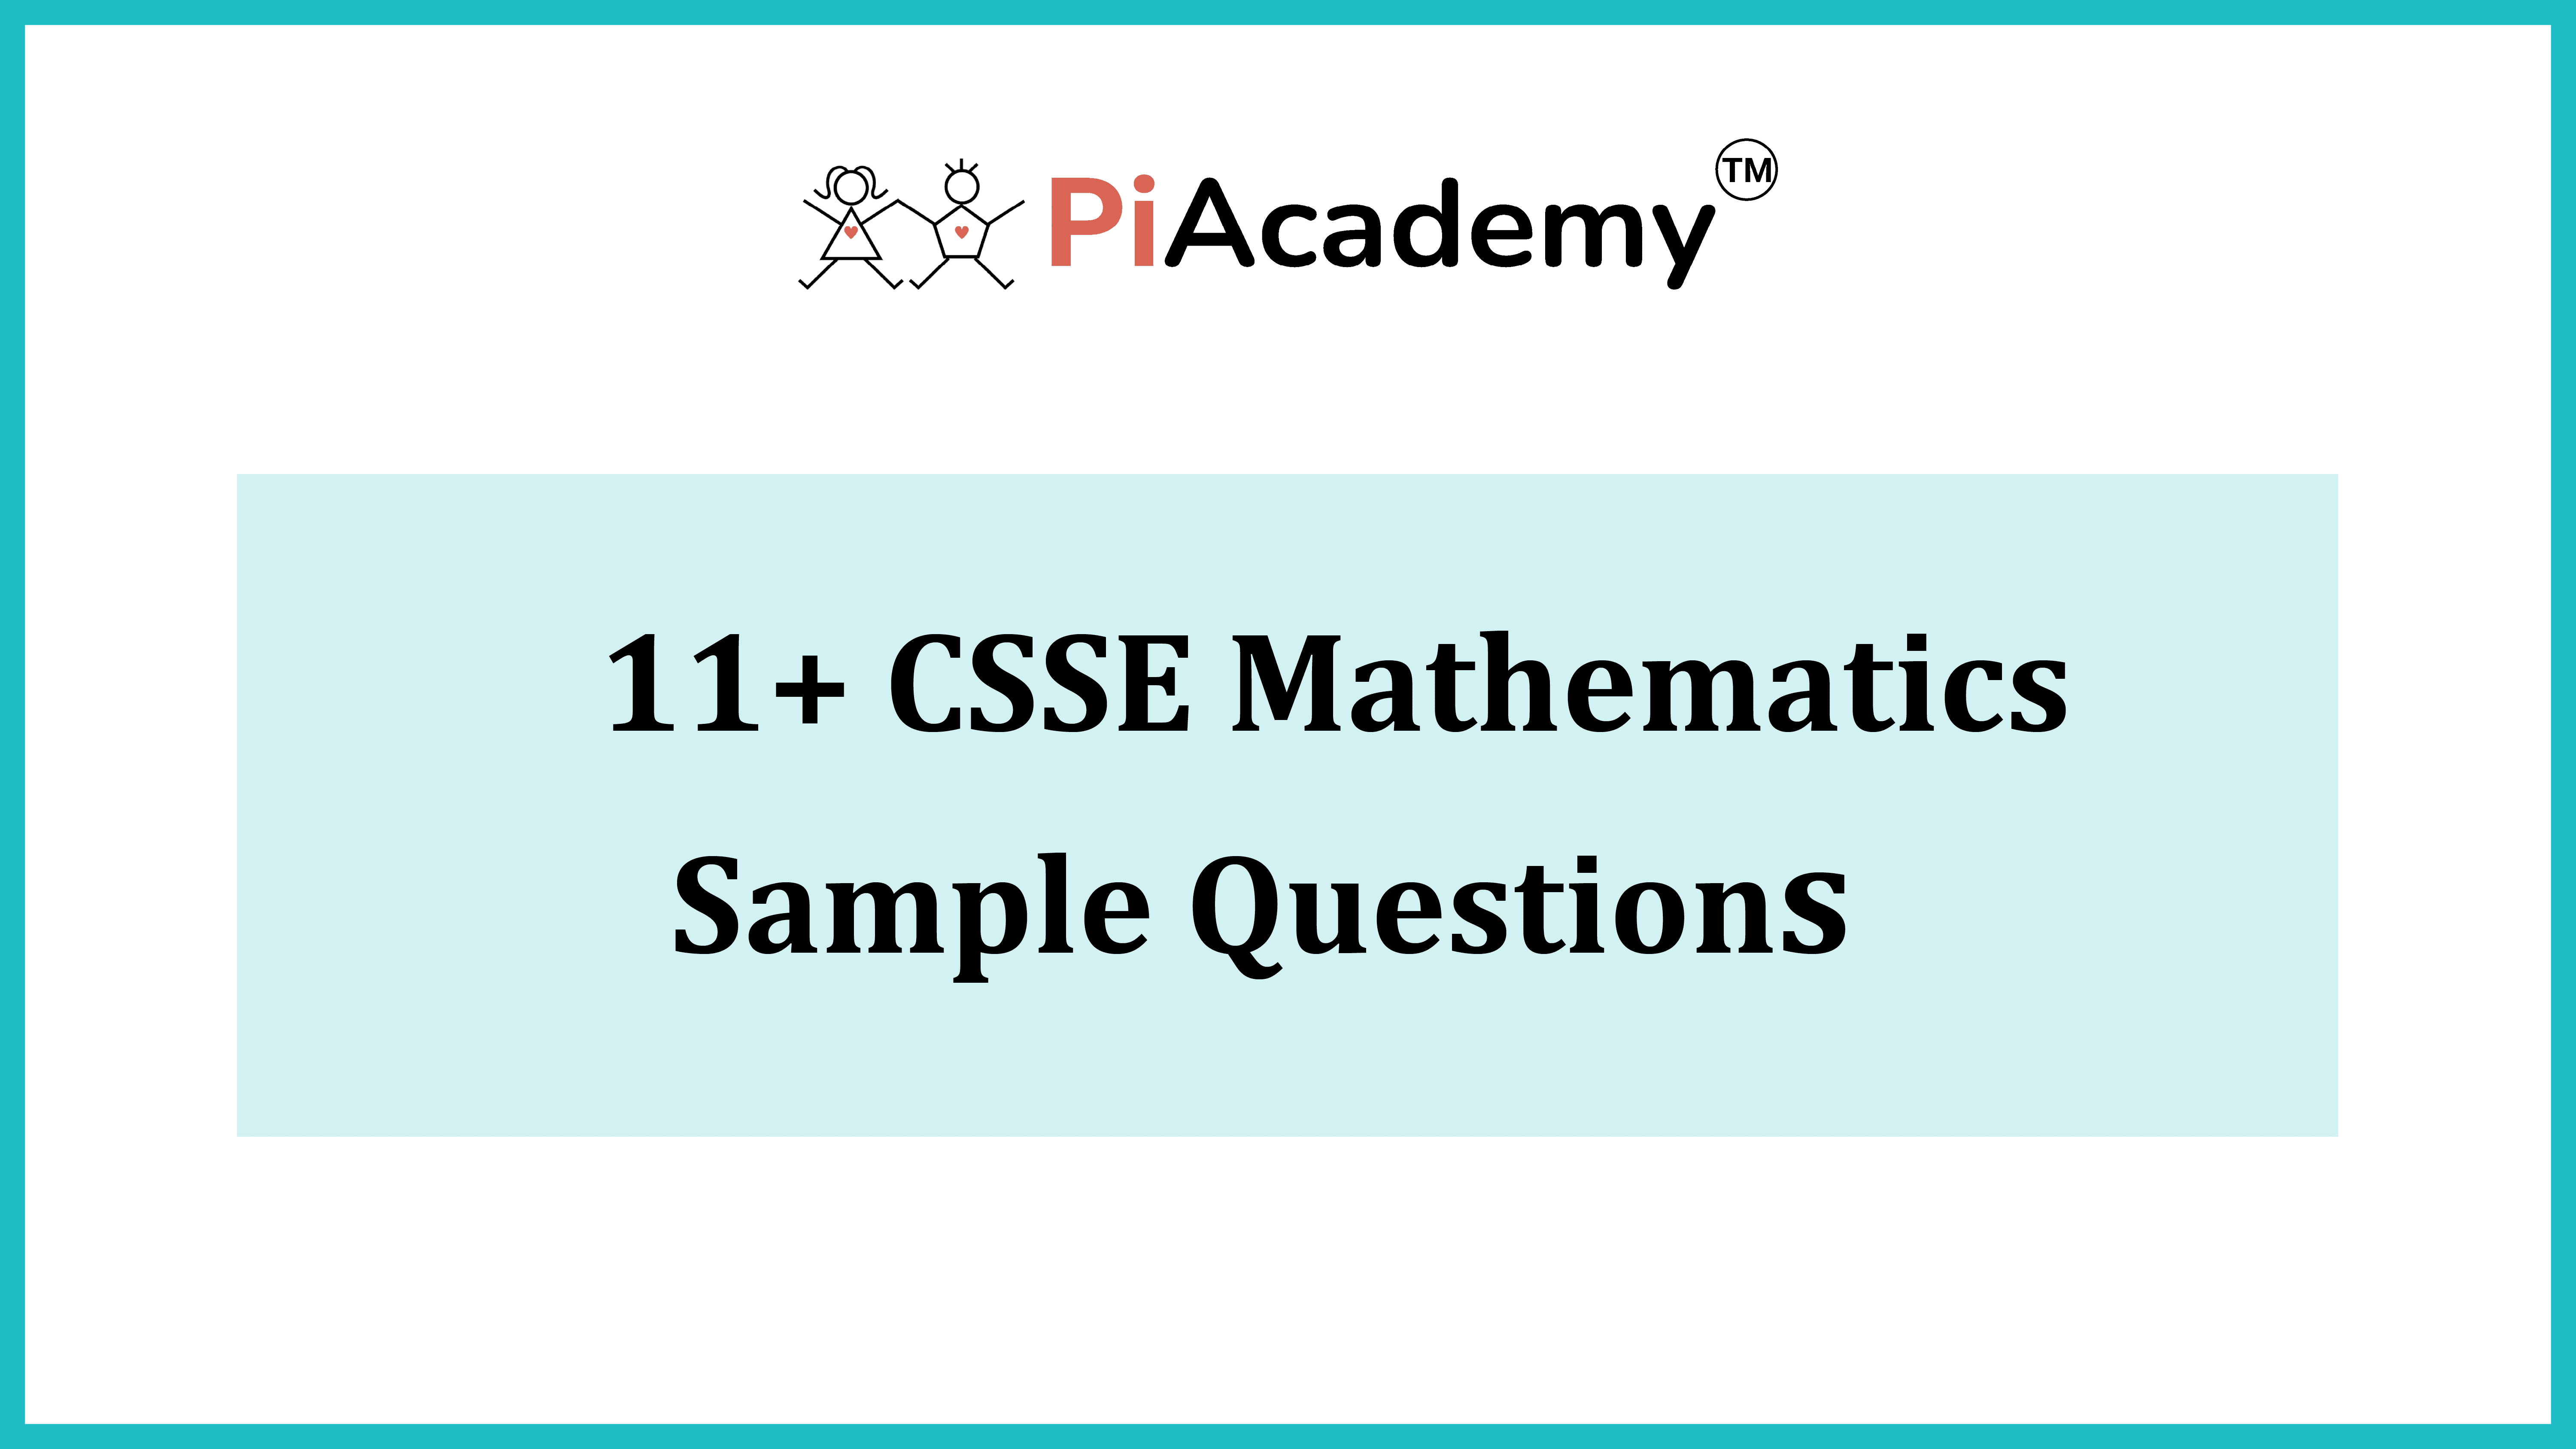 11-CSSE-Complete-Guide-Article-Maths-Title